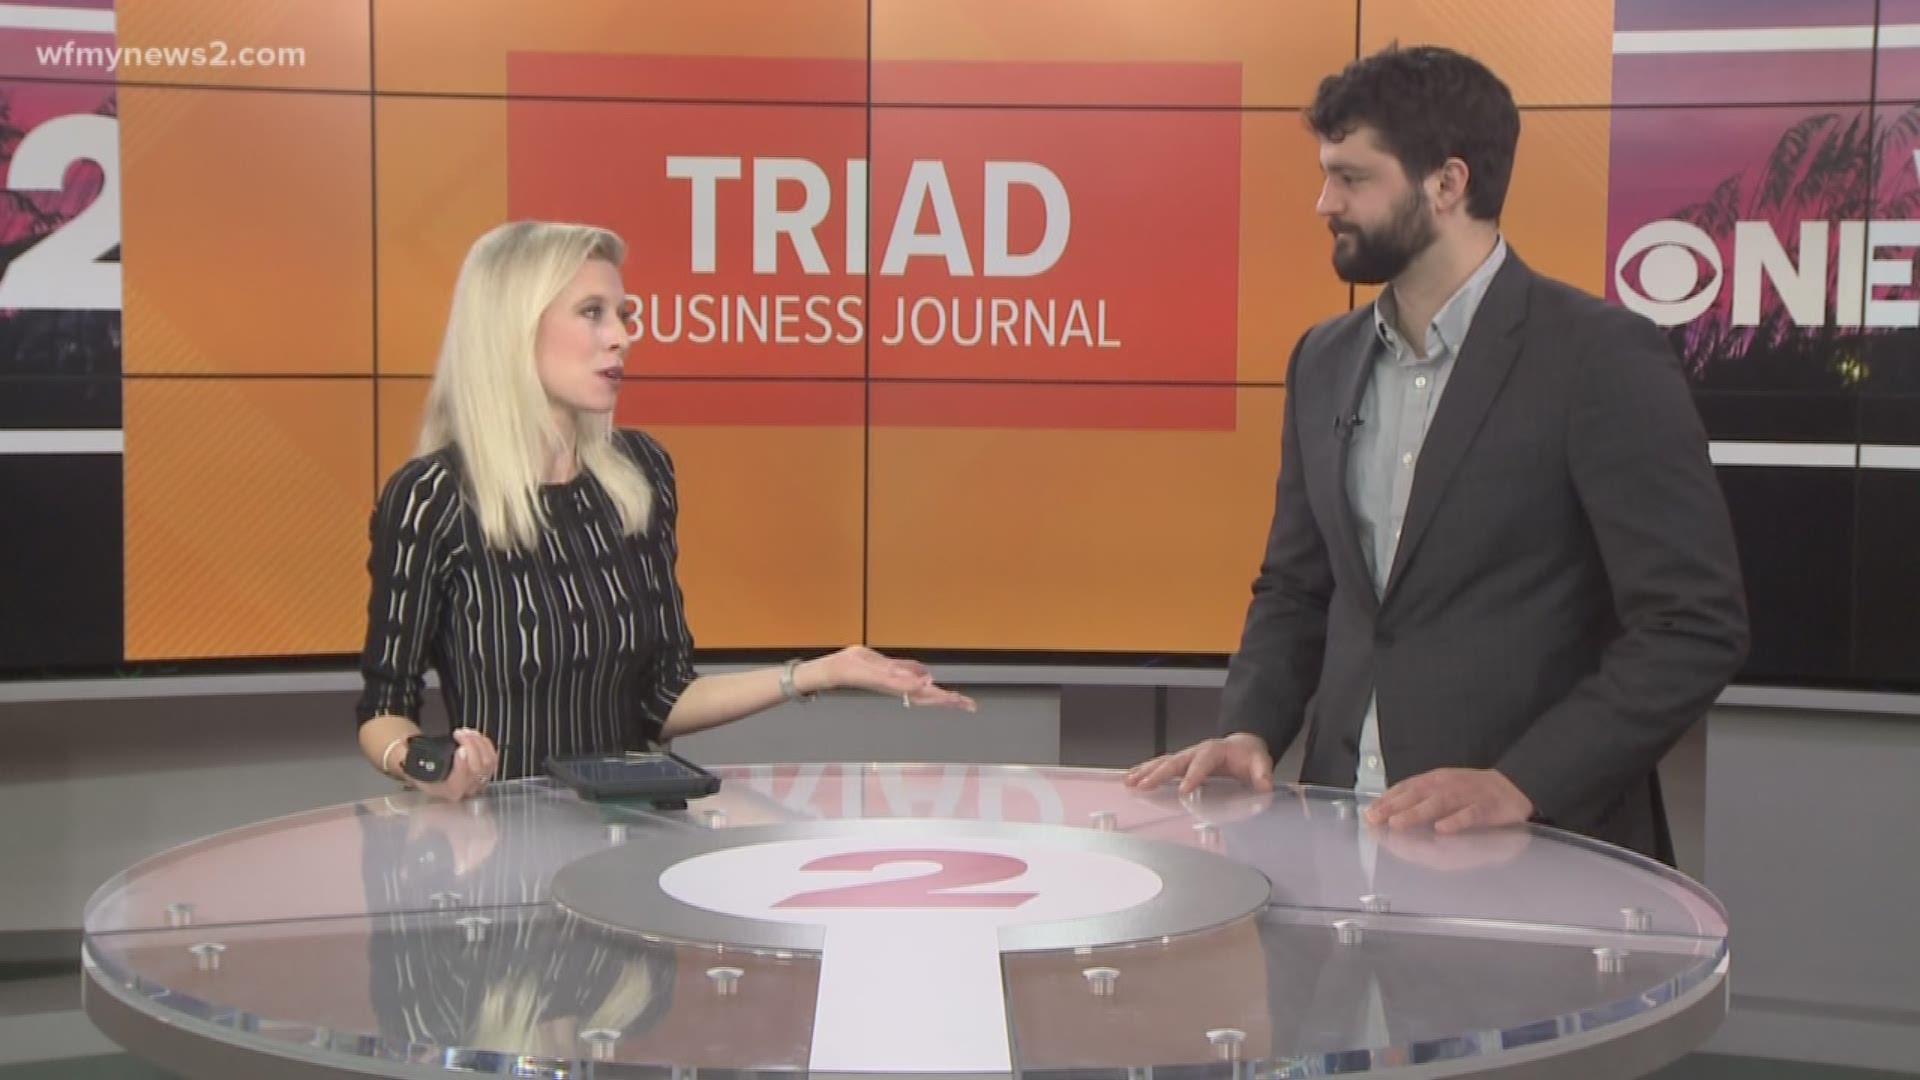 Tons of business opportunity around the Triad.
Our friends at the Triad Business Journal stop by for a chat.